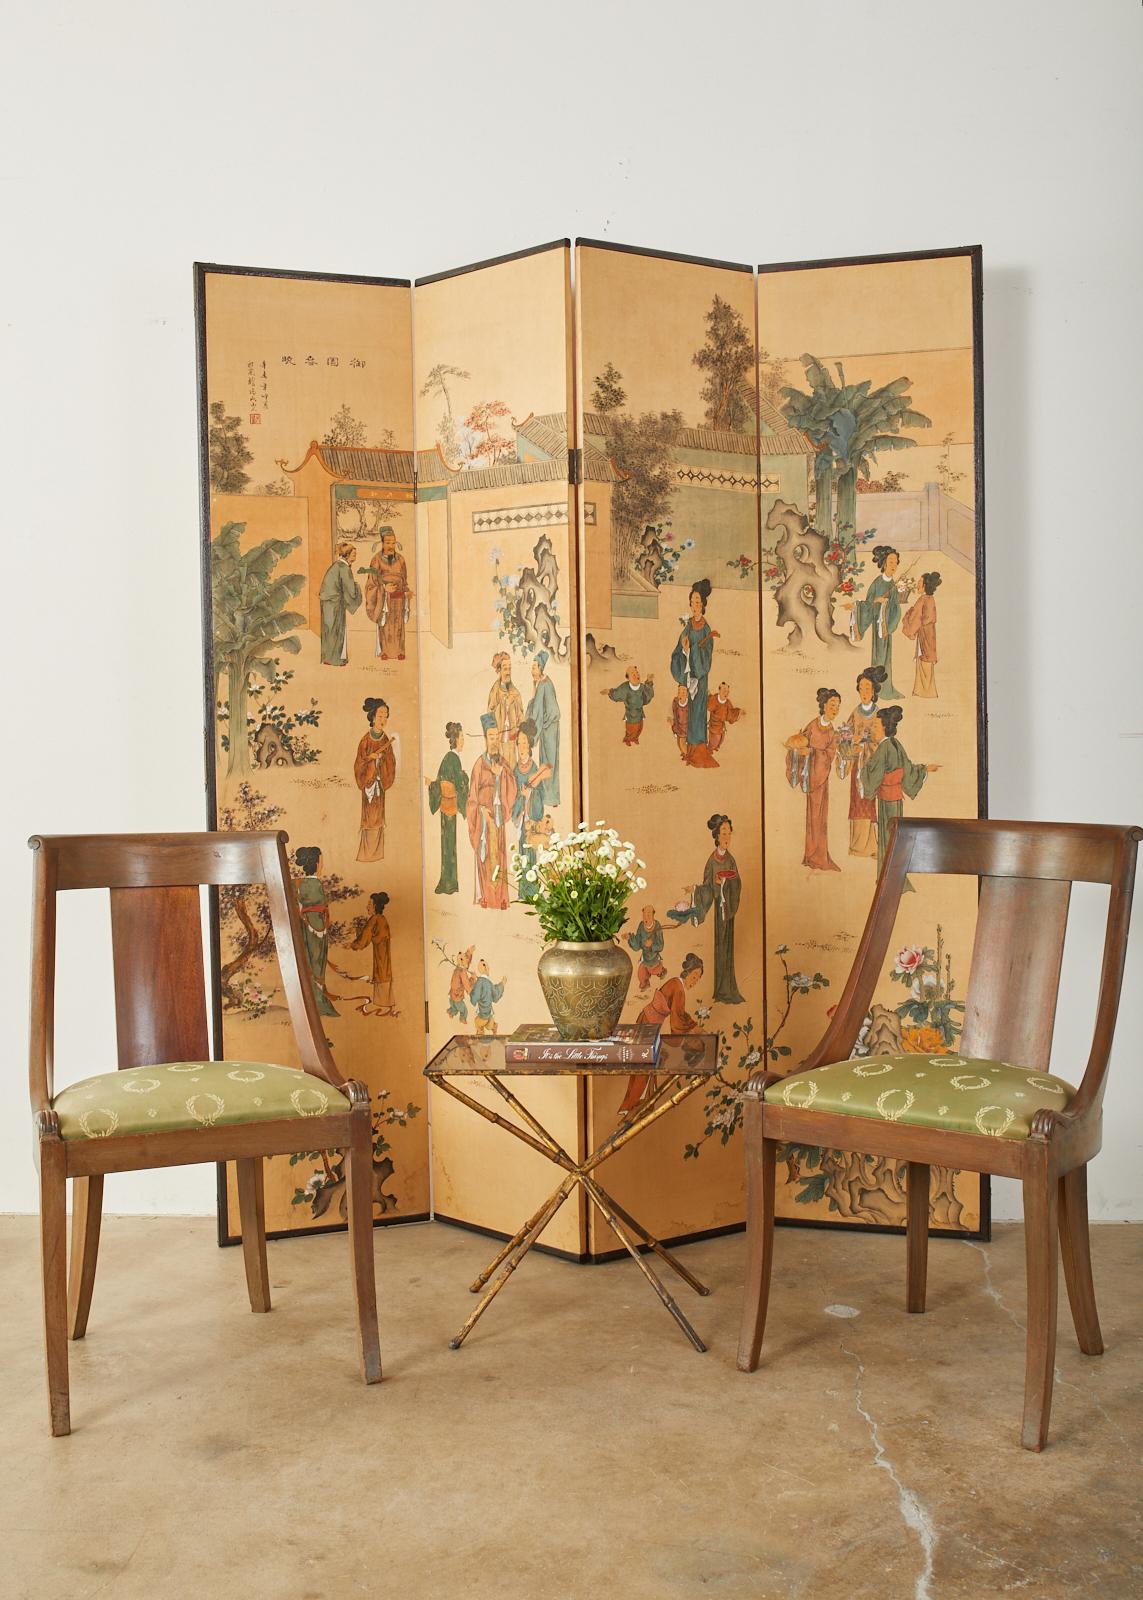 Colorful Chinese export four-panel folding wallpaper screen depicting figures in leisurely activities. Vibrant colors from florals and elaborate robes decorate the scene over a saffron yellow background. Titled and signed with a seal in the upper